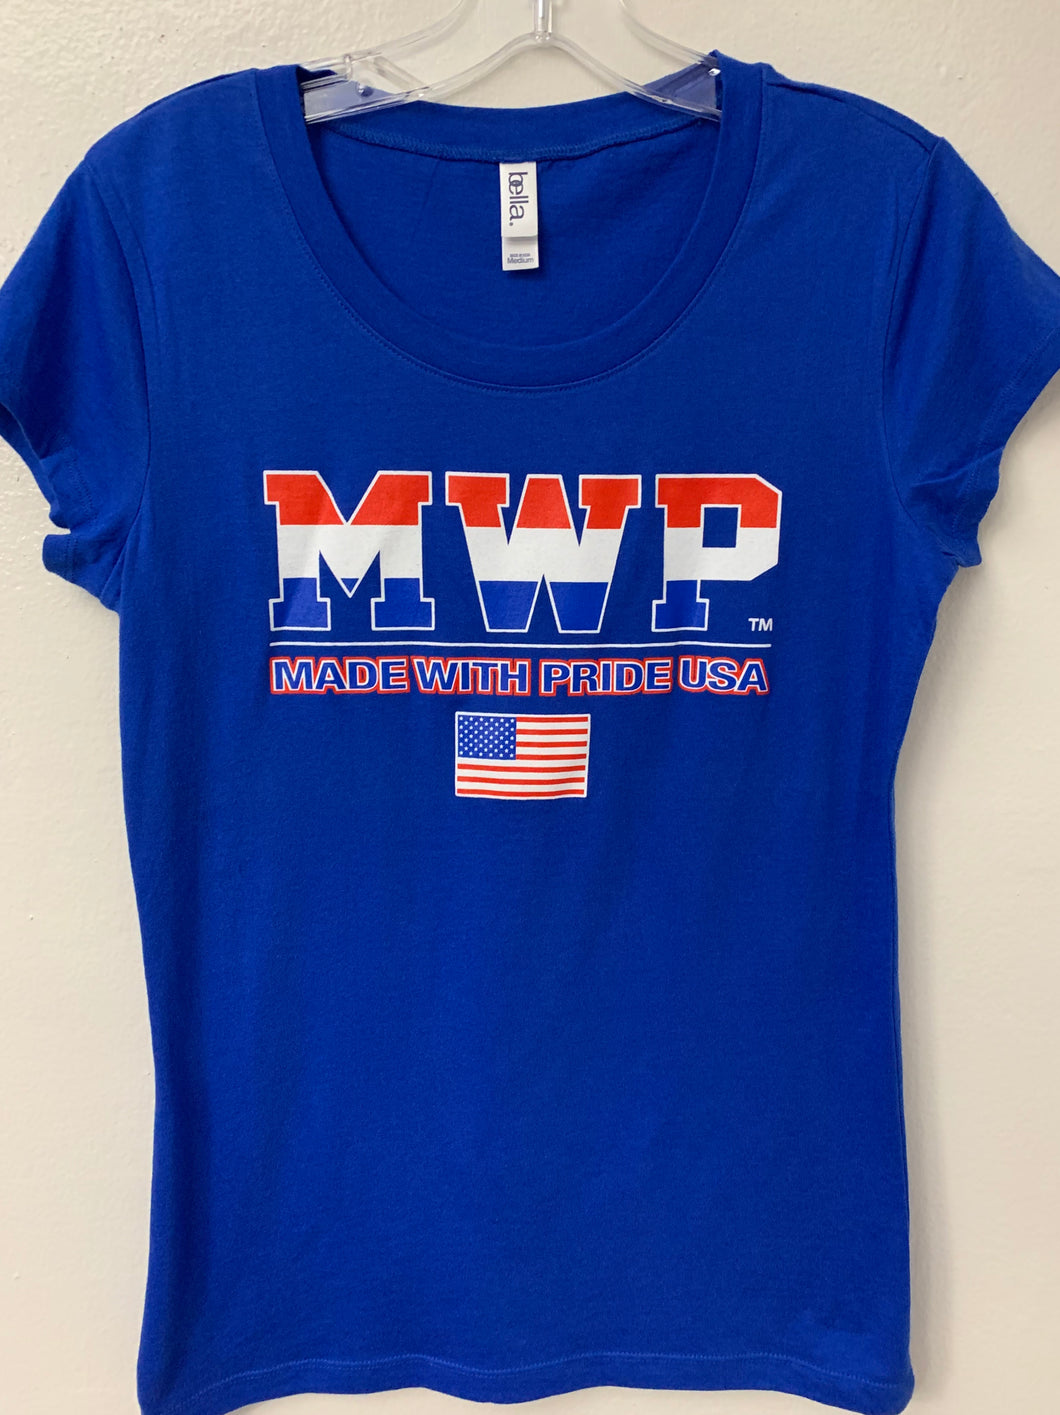 Ladies MWP (MADE WITH PRIDE USA) T-Shirt